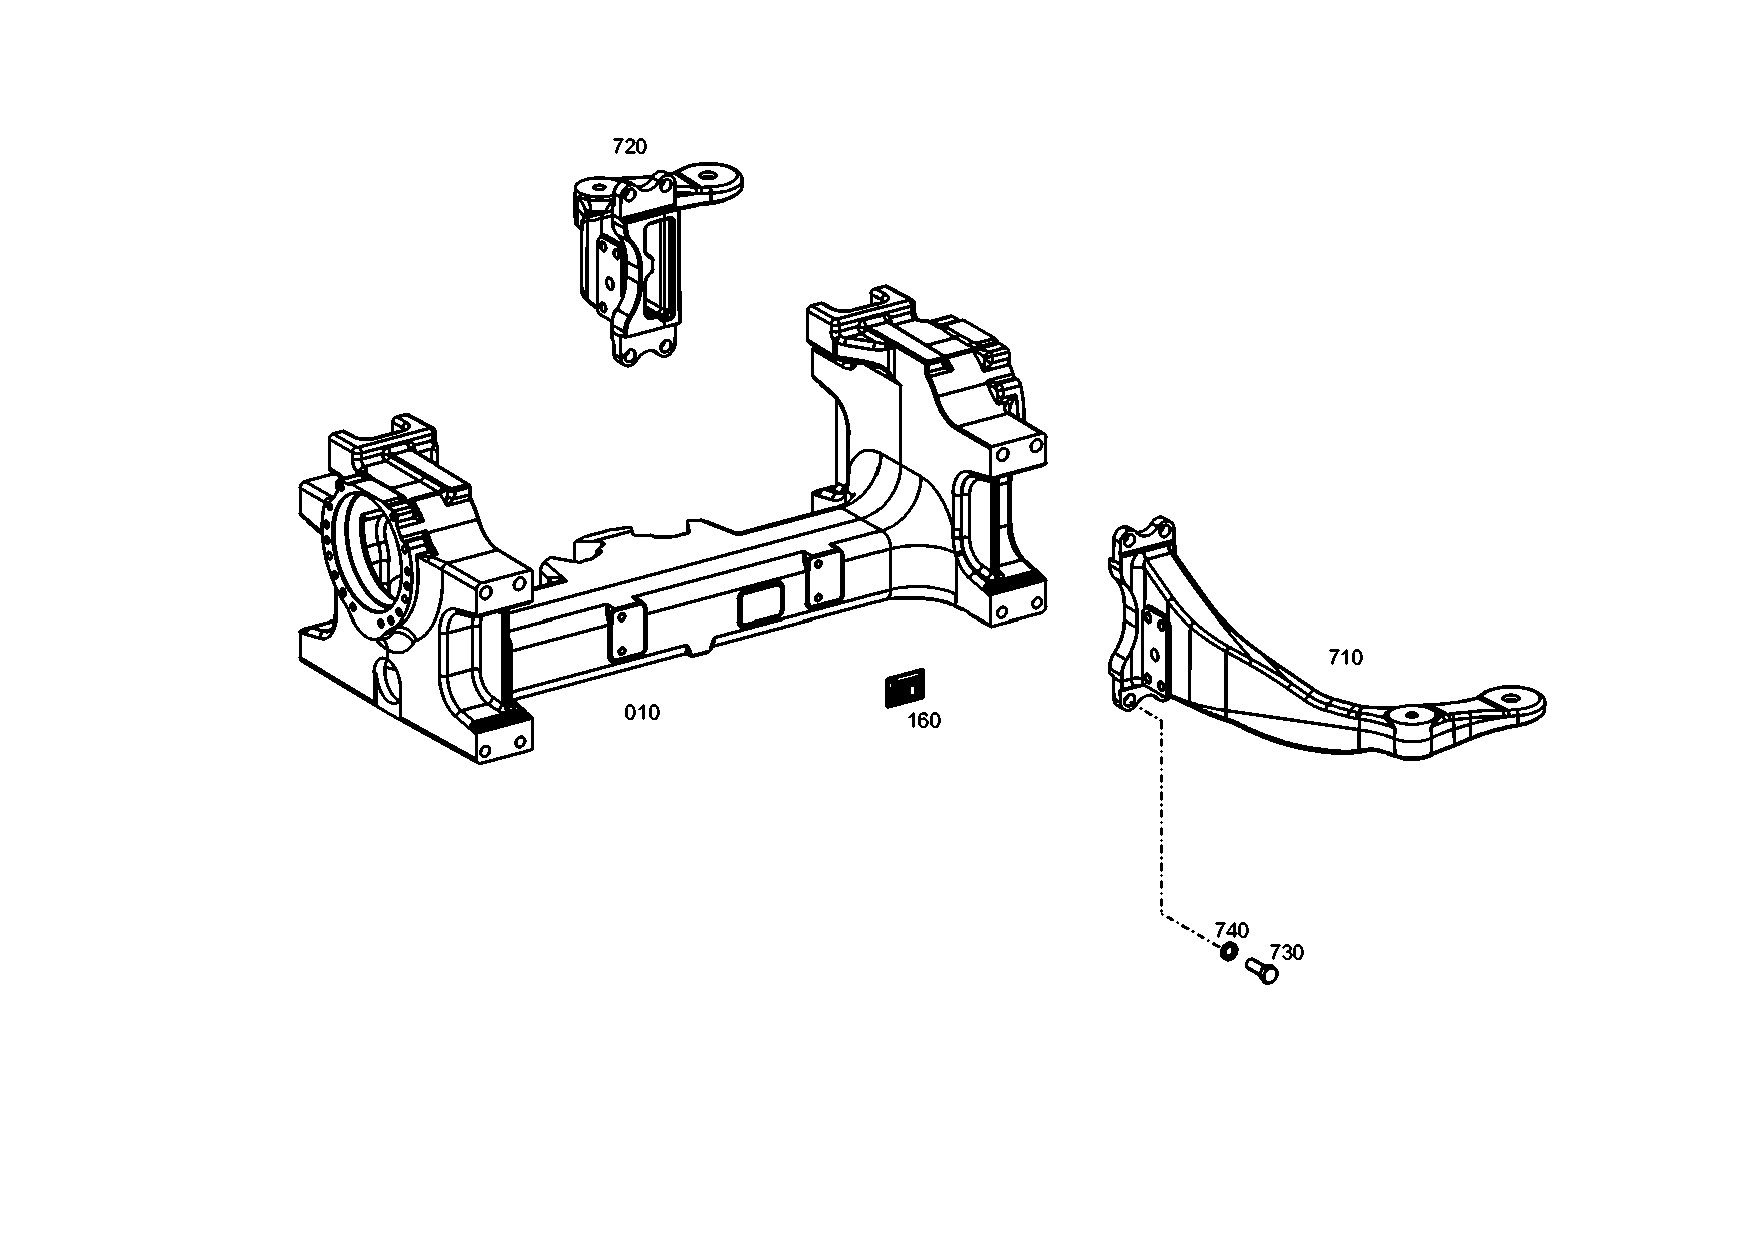 drawing for BUCHER FRANZ GMBH A0003200870 - SPRING CARRIER (figure 1)